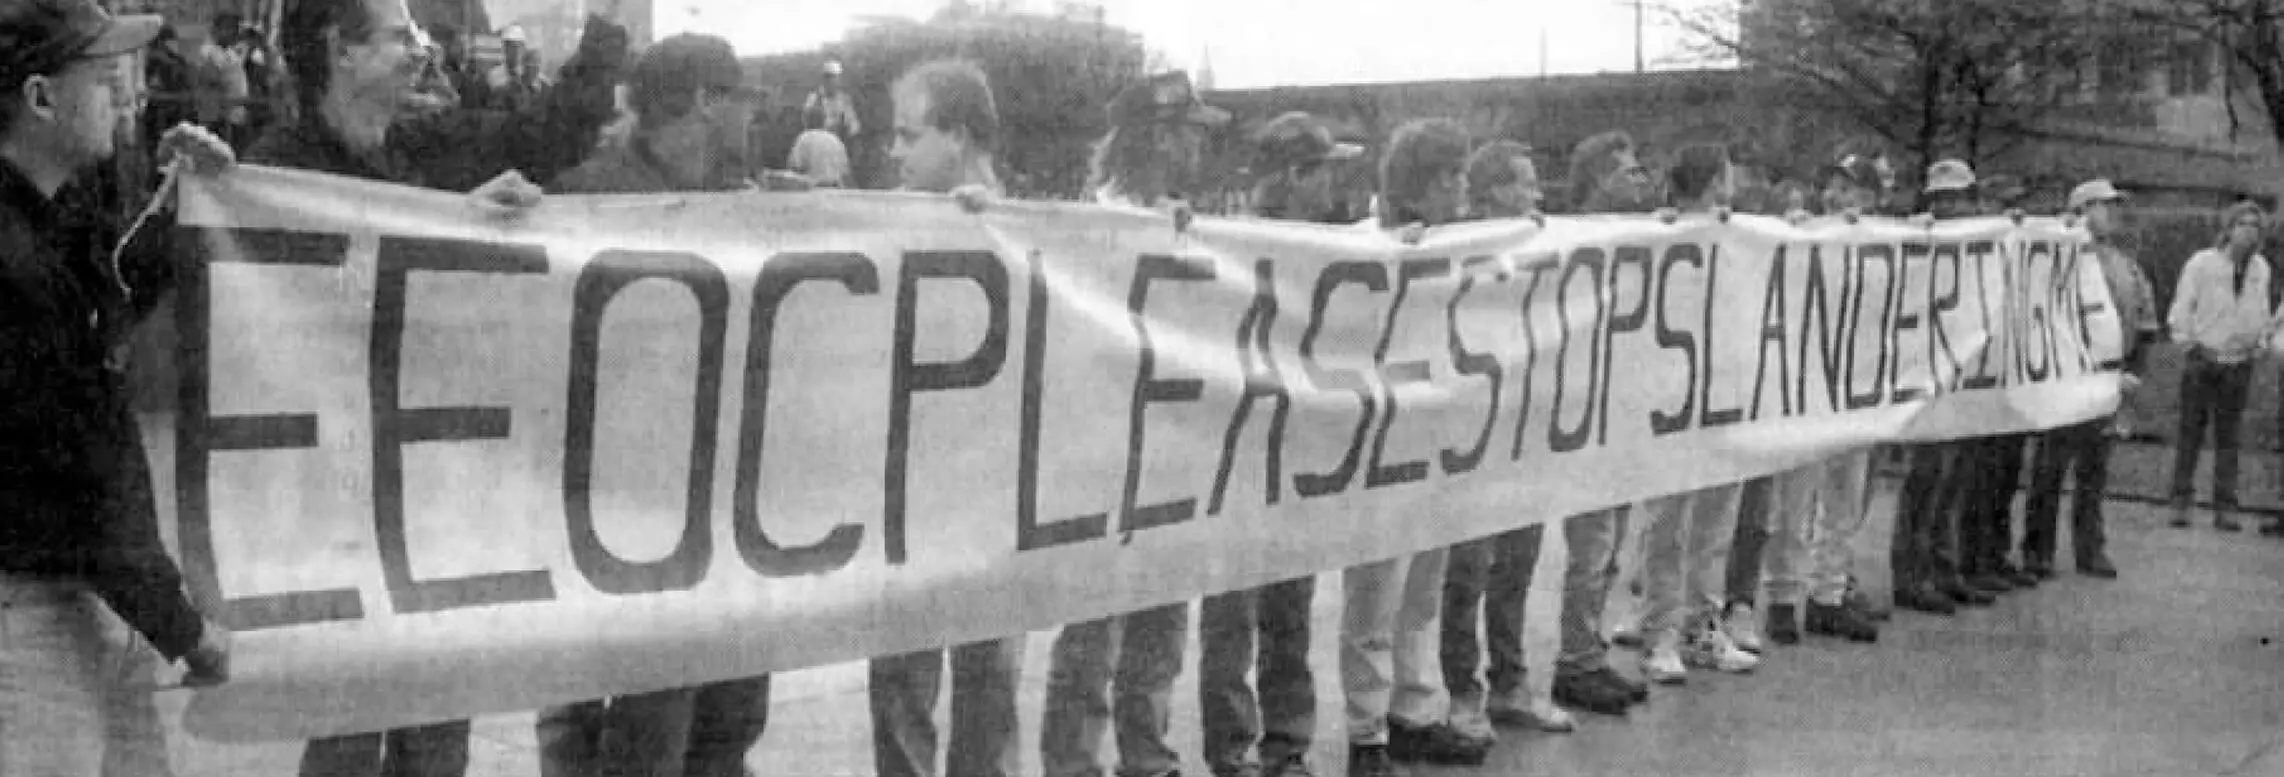 Black and white photograph of people standing in a line holding a banner.